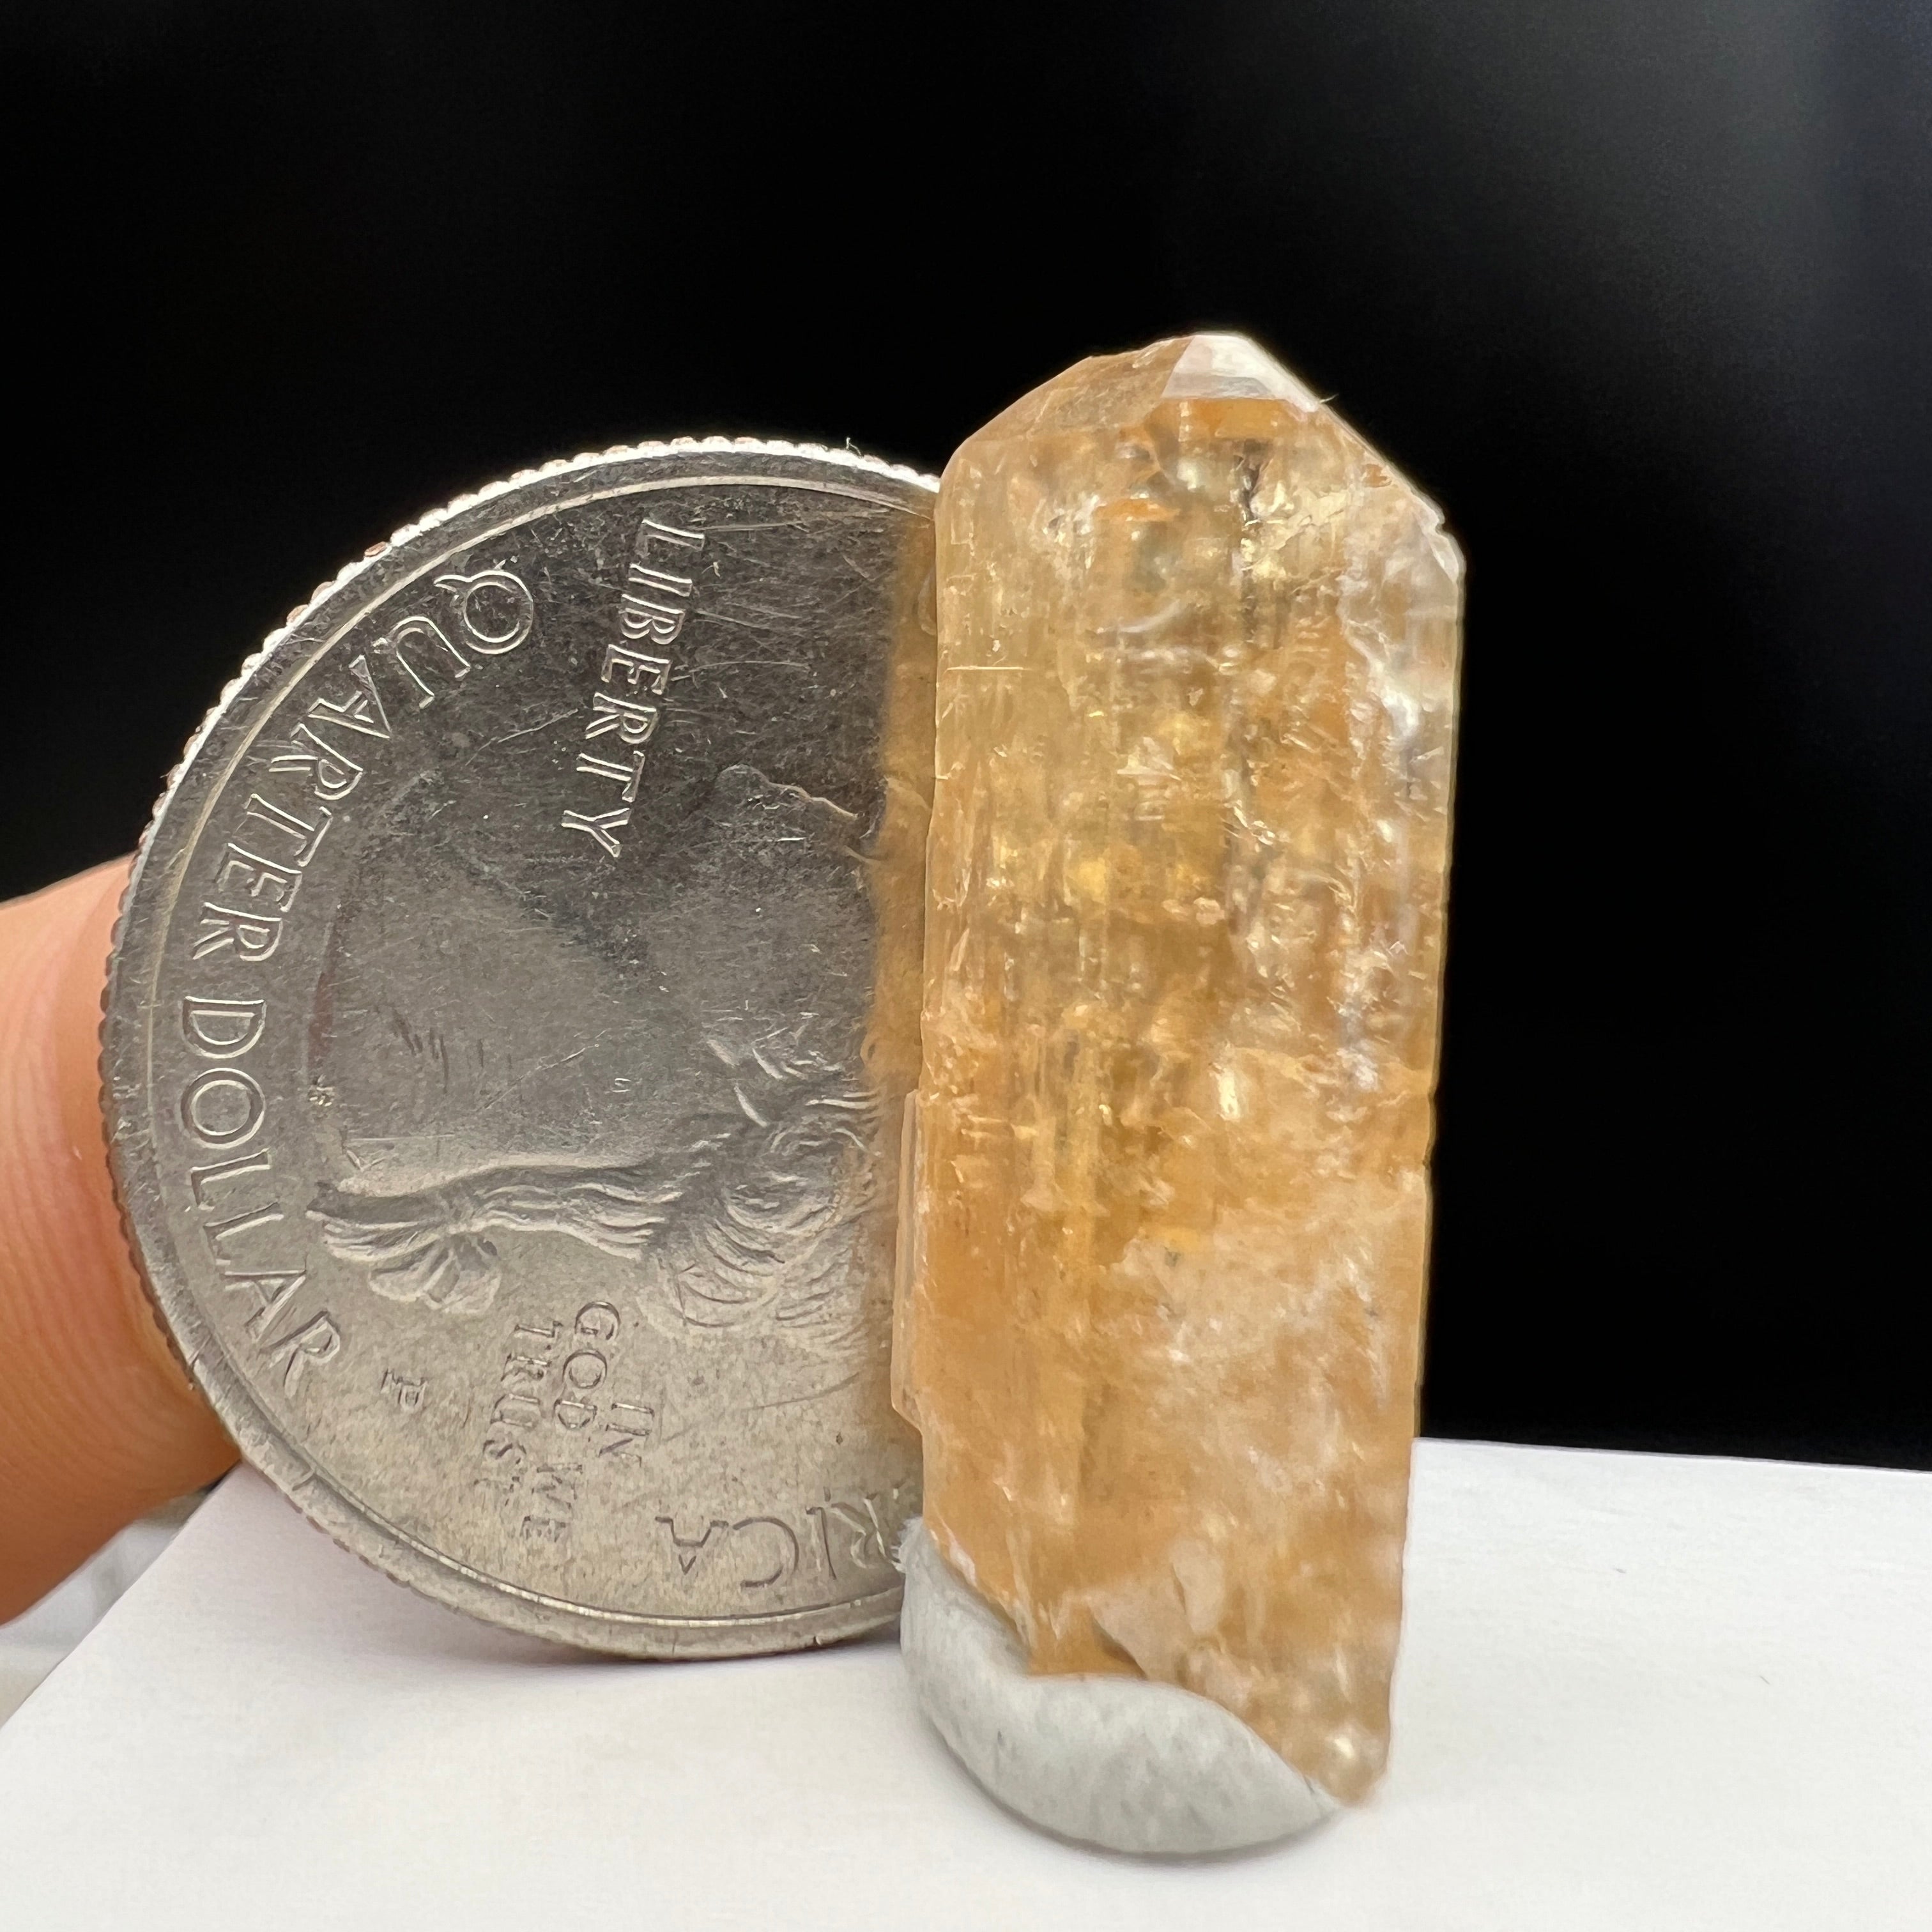 Imperial Topaz Natural Full Terminated Crystal - 082